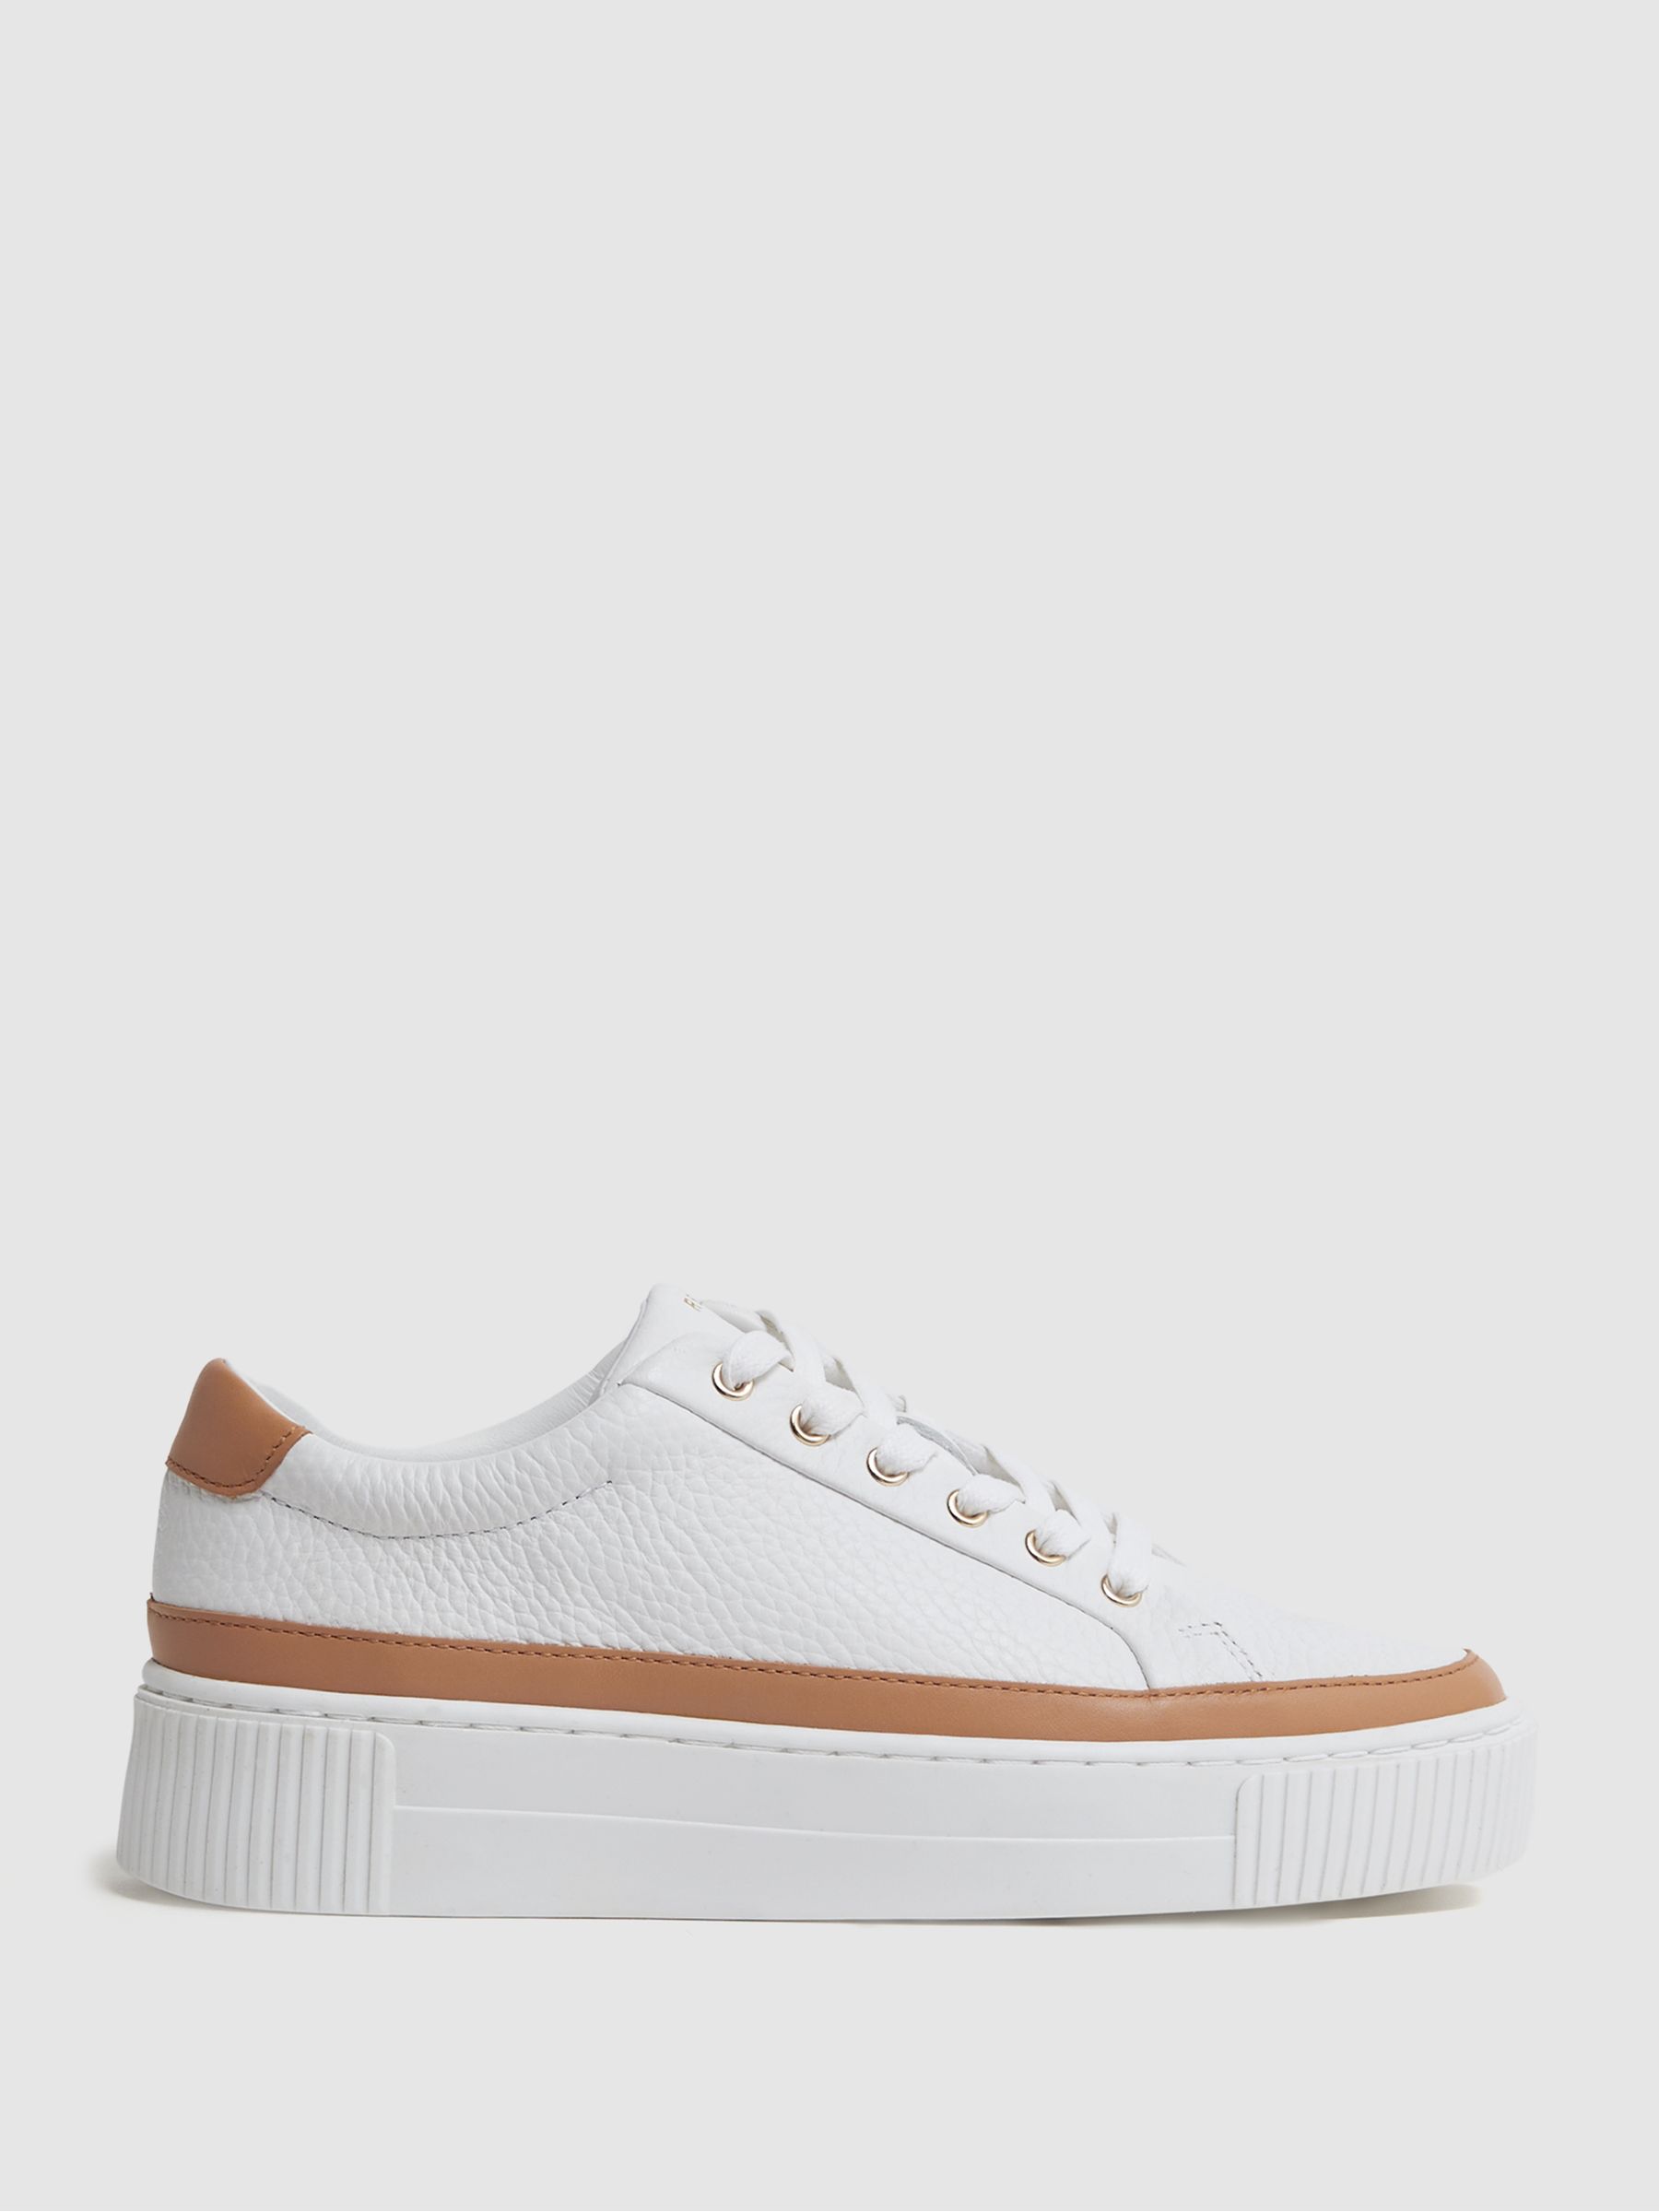 Reiss Leanne Grained Leather Platform Trainers | REISS USA